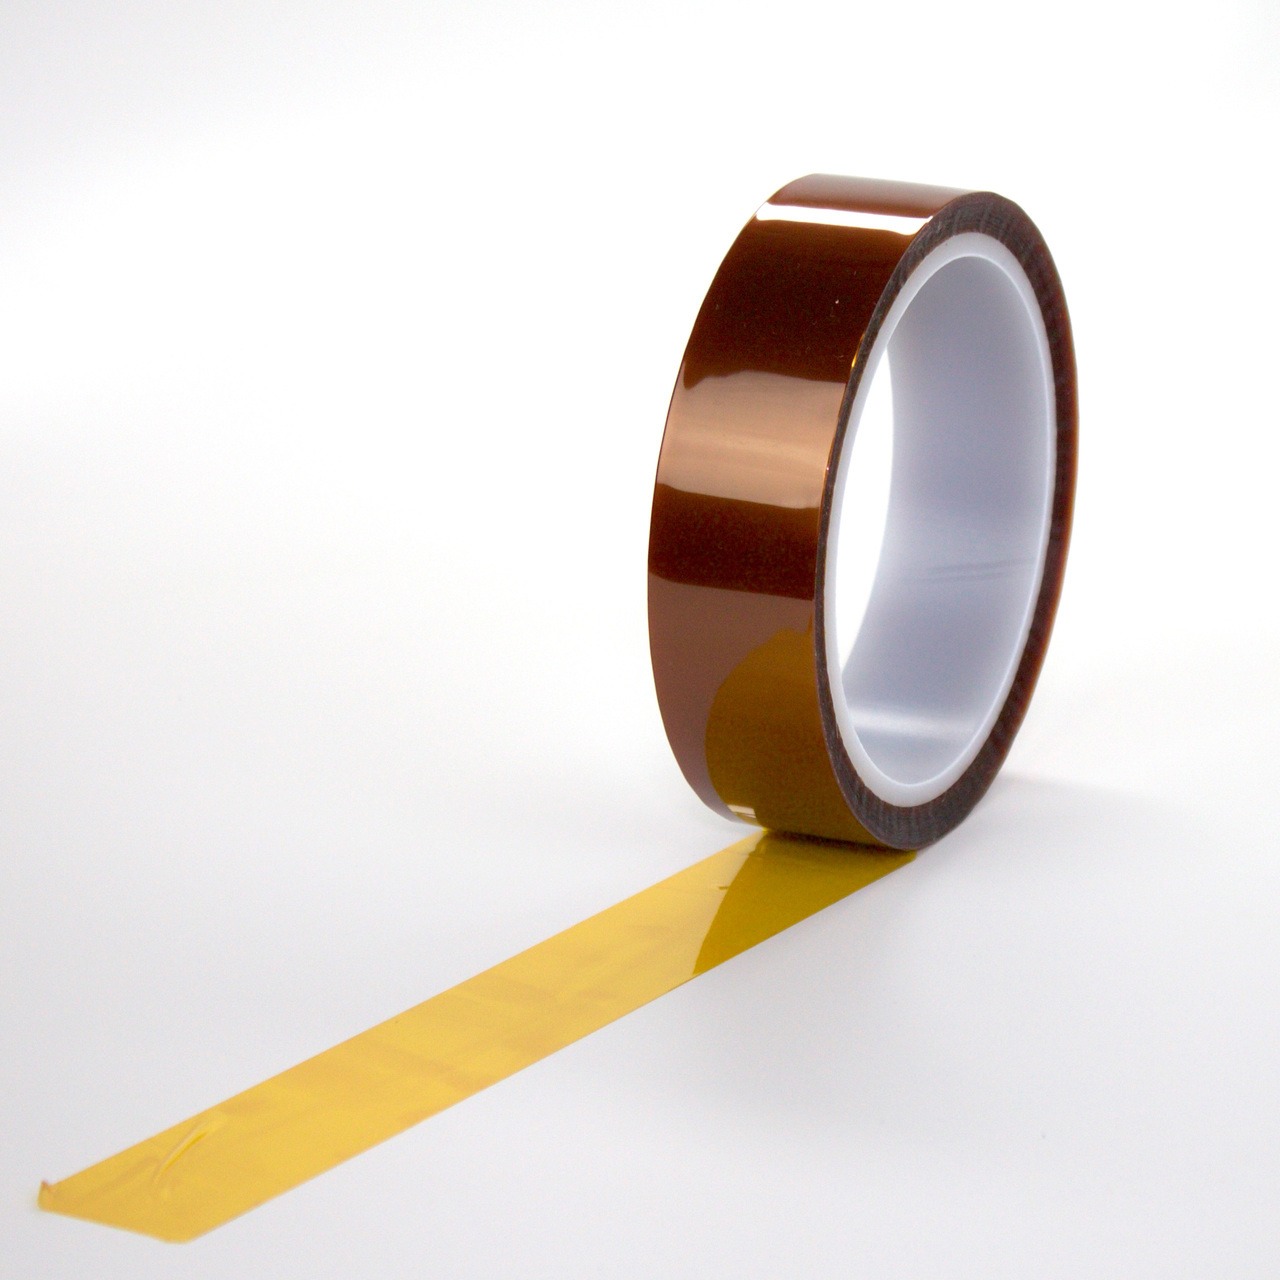 10 Rolls Electriduct 1/2 Polyimide Tape 1 Mil High Temperature Resistant Film with Silicone Adhesive 36 Yards